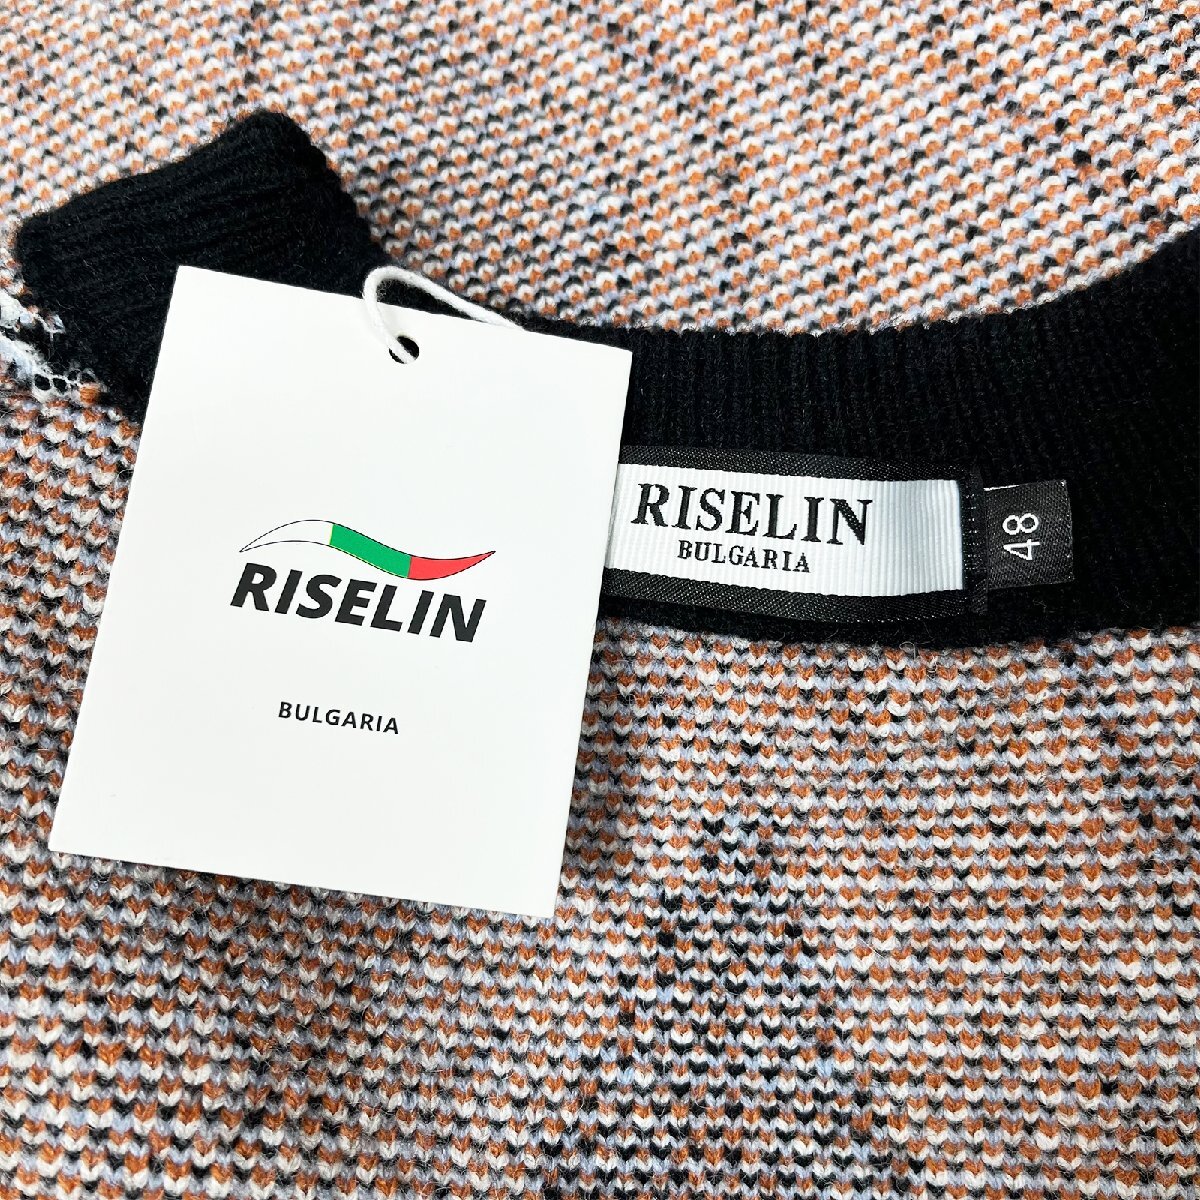  piece . Europe made * regular price 5 ten thousand * BVLGARY a departure *RISELIN sweater wool . soft comfortable thick knitted protection against cold total pattern retro standard tops L/48